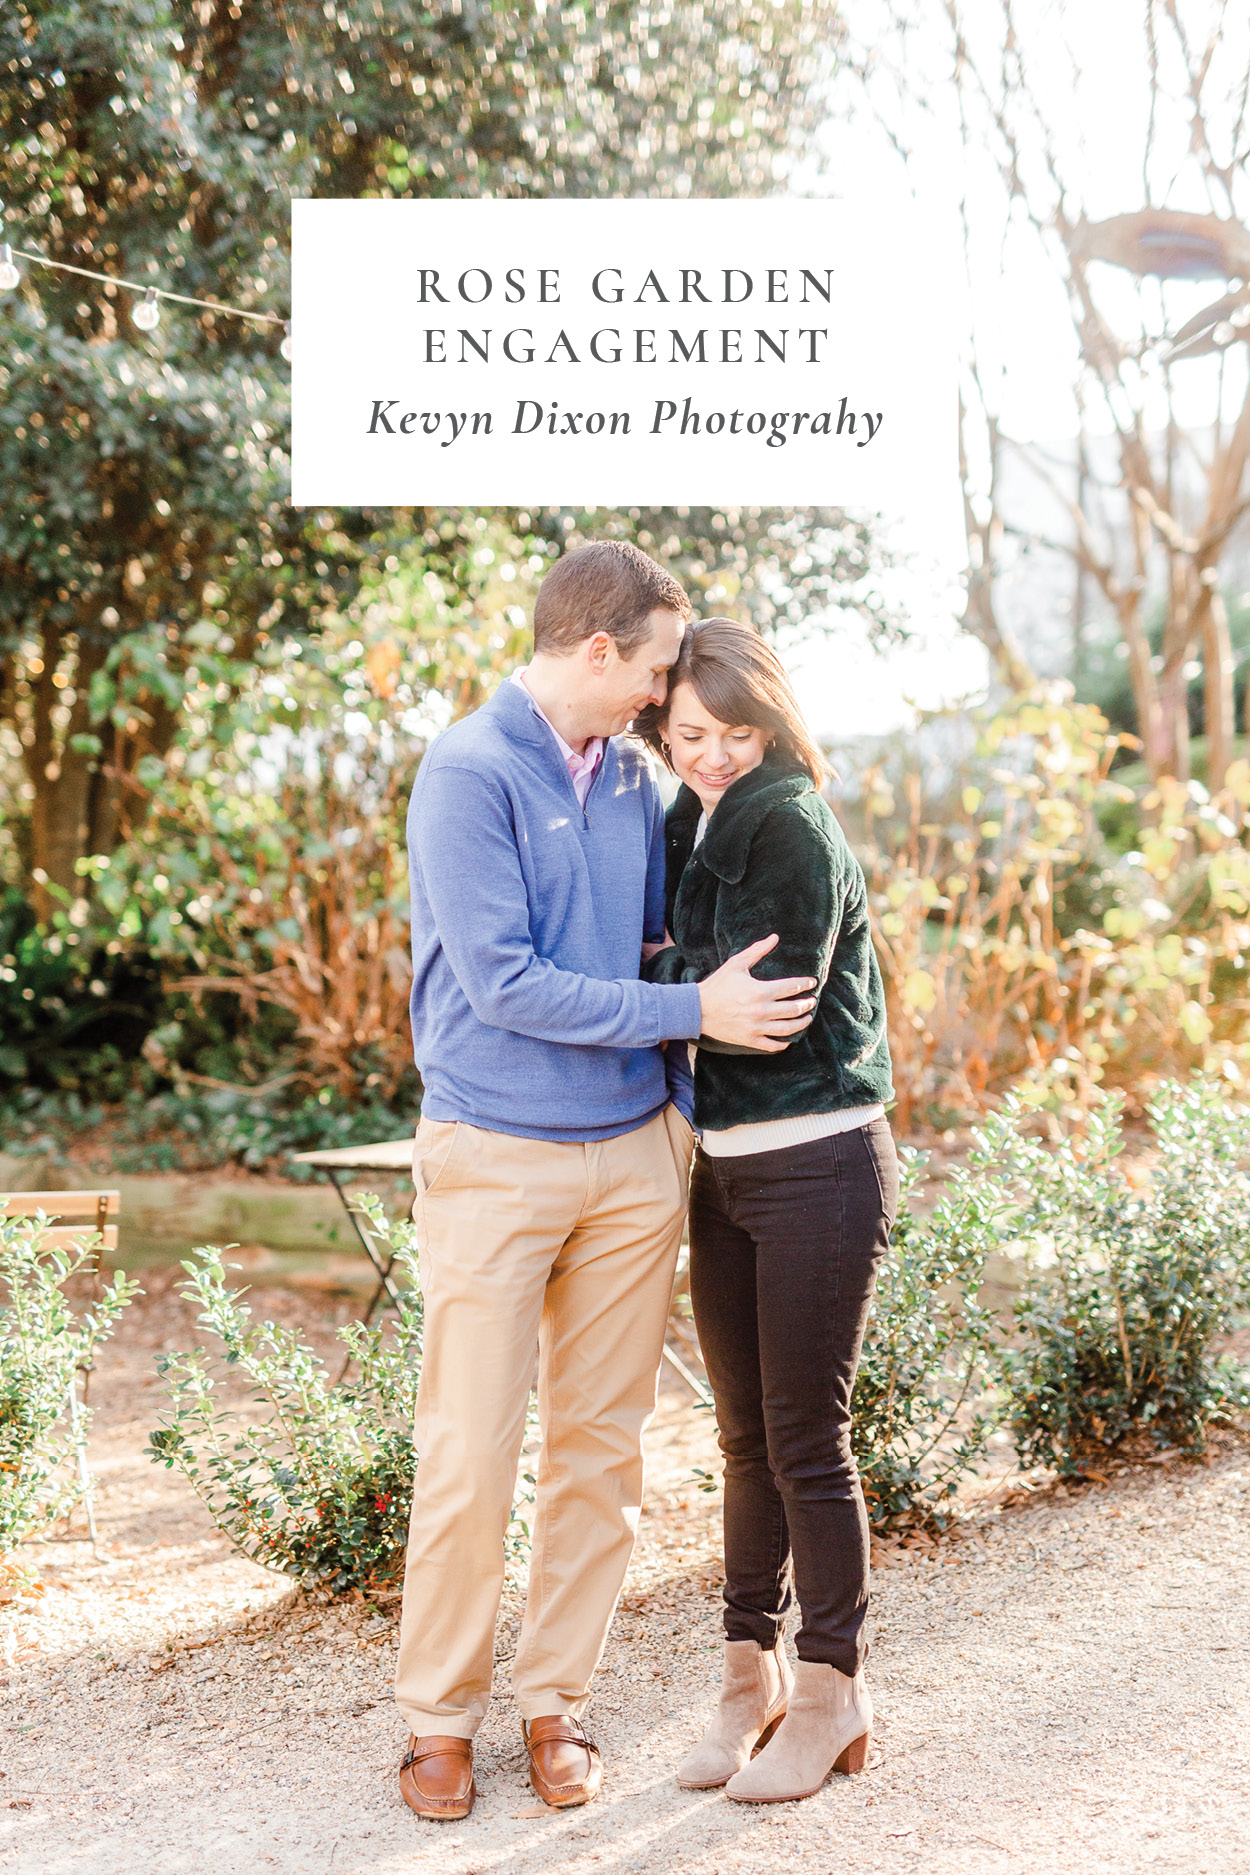 Winter Engagement Session Inspiration pin image